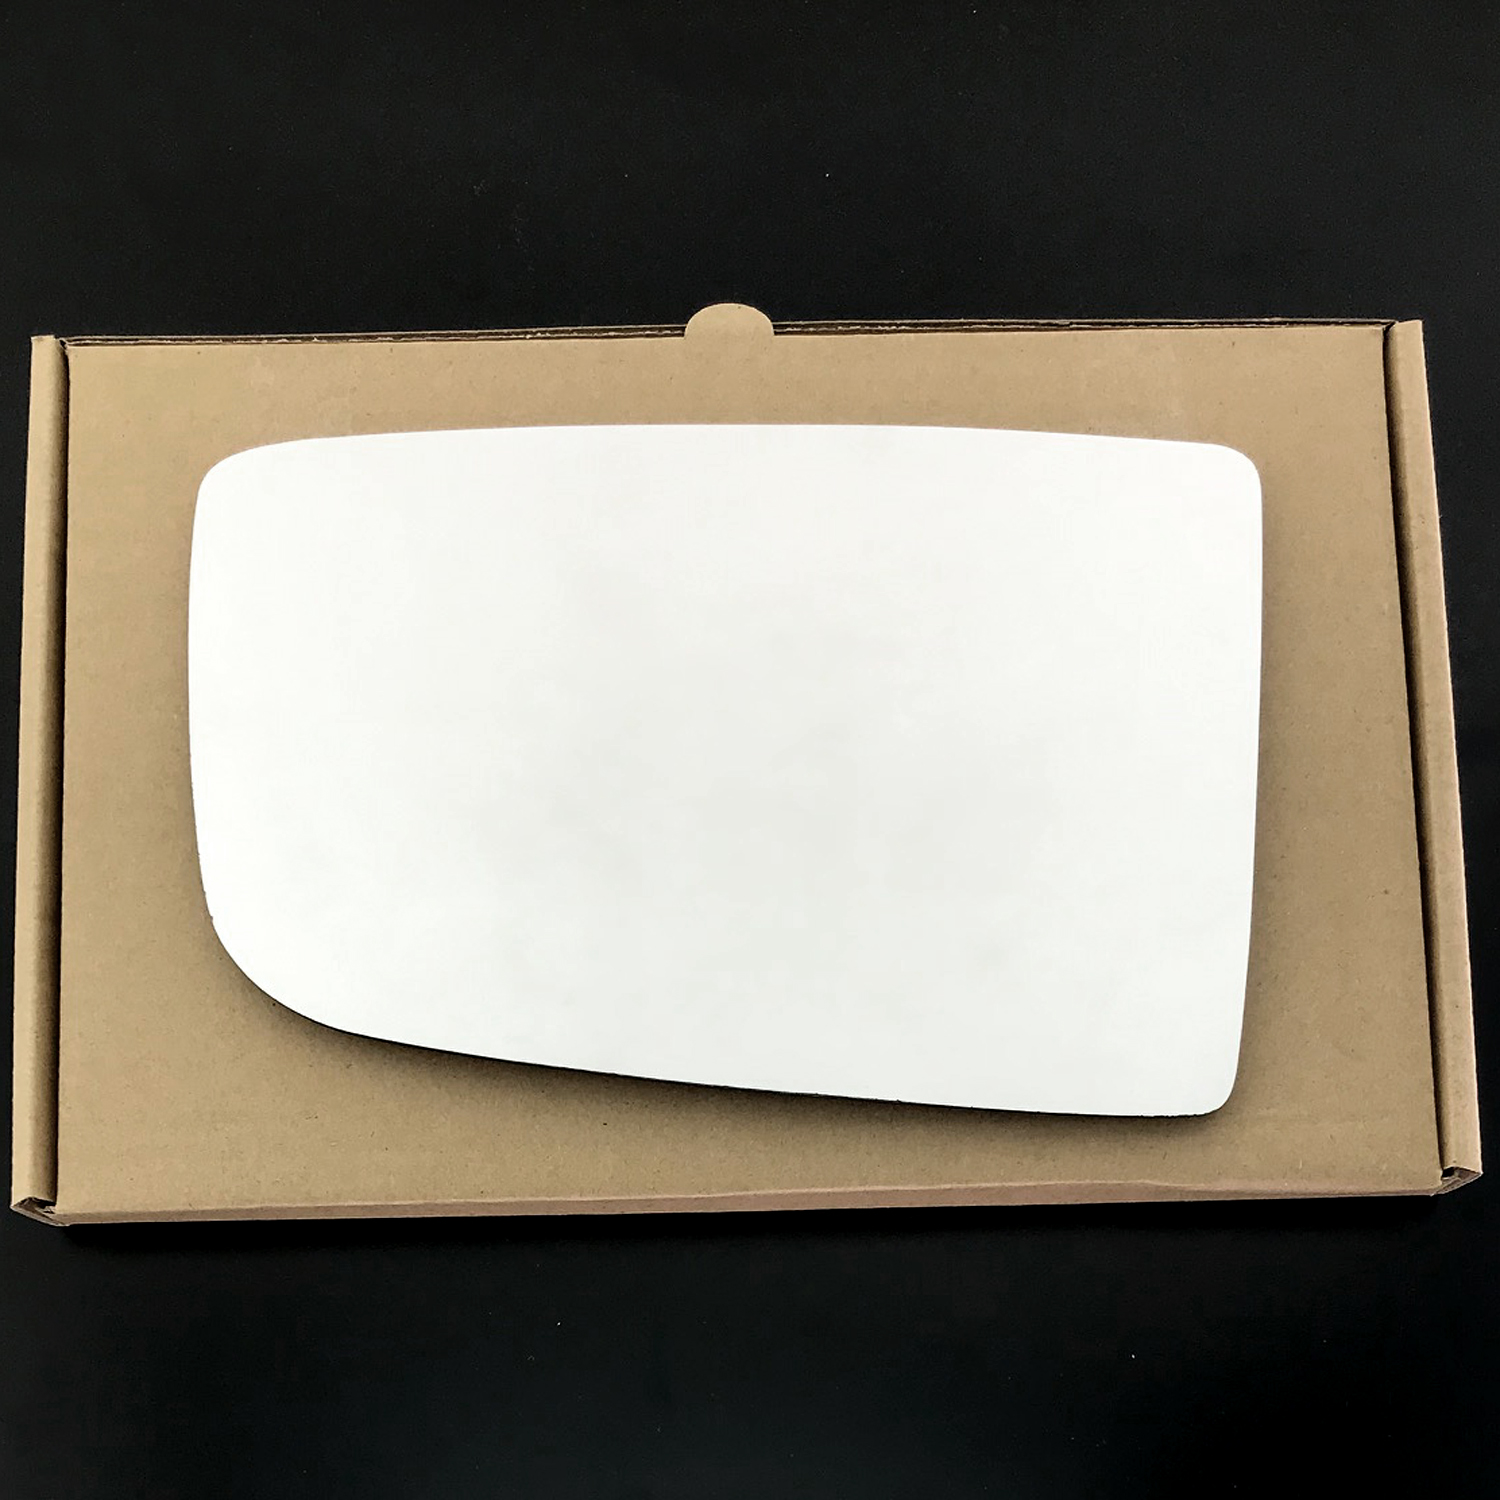 Volkswagen Crafter  Wing Mirror Glass LEFT HAND ( UK Passenger Side ) 2007 to 2016 ( With Indicator ) – Convex Wing Mirror